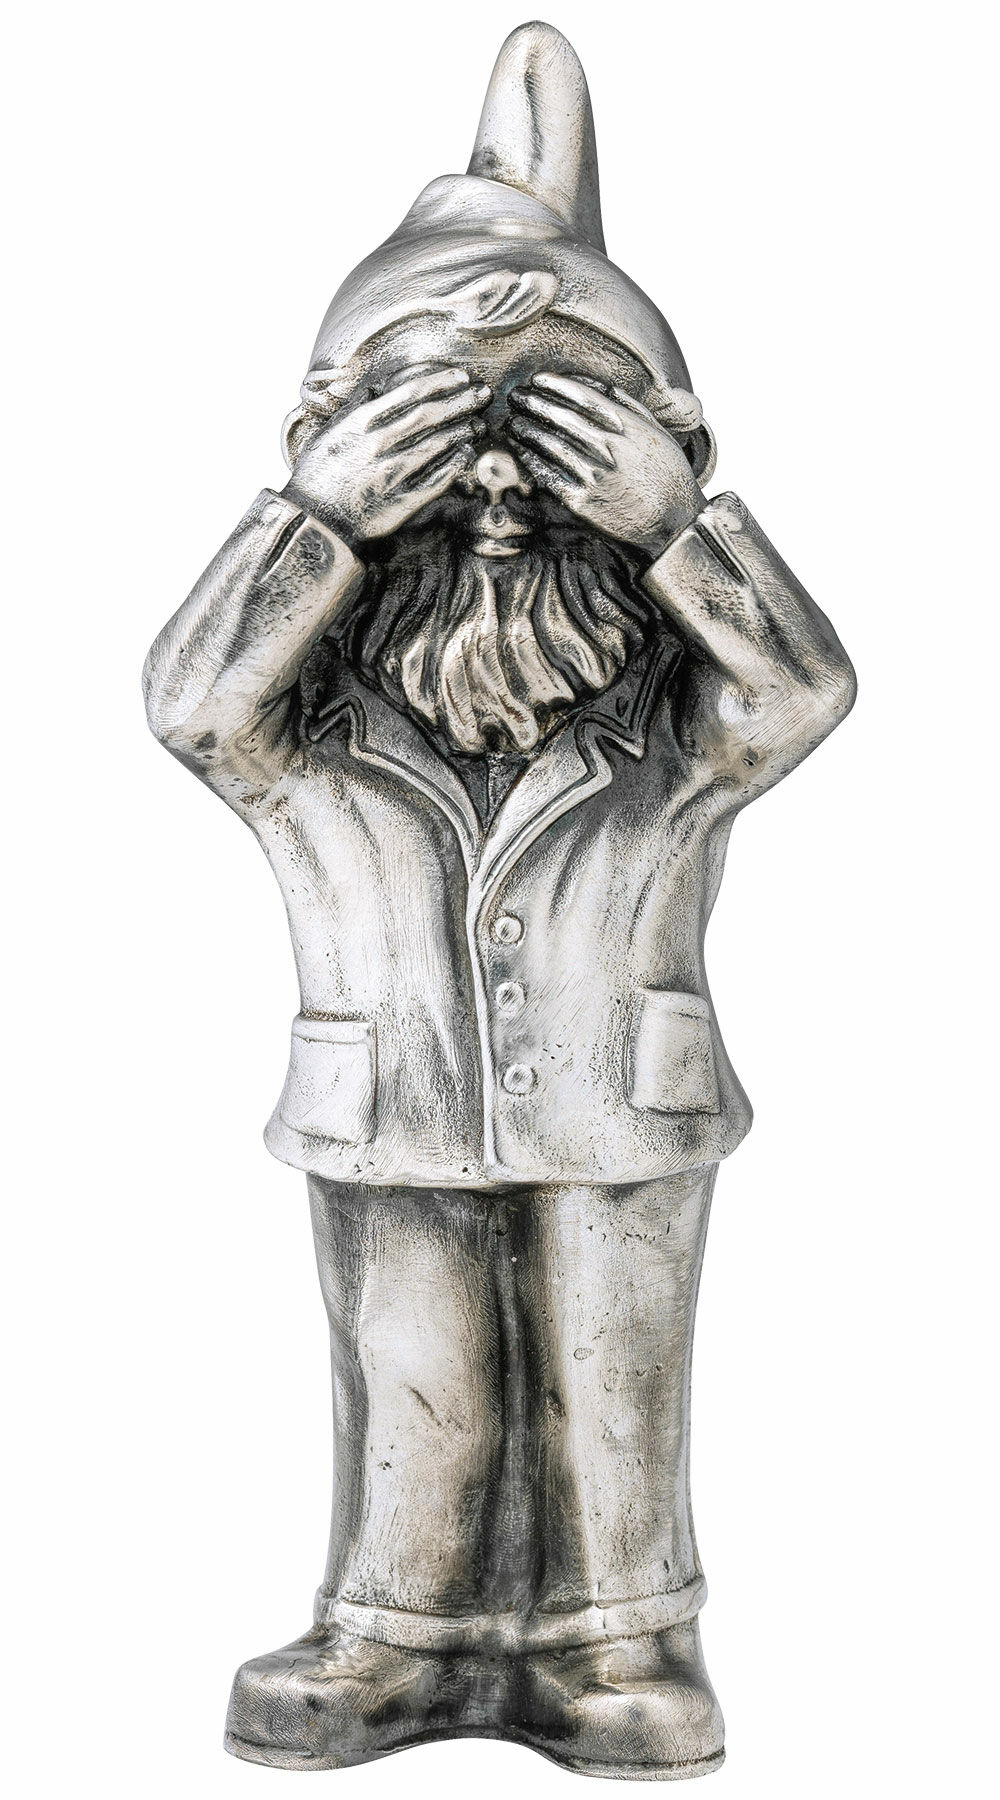 Sculpture "Bearer of Secrets - See Nothing", silver-plated version by Ottmar Hörl